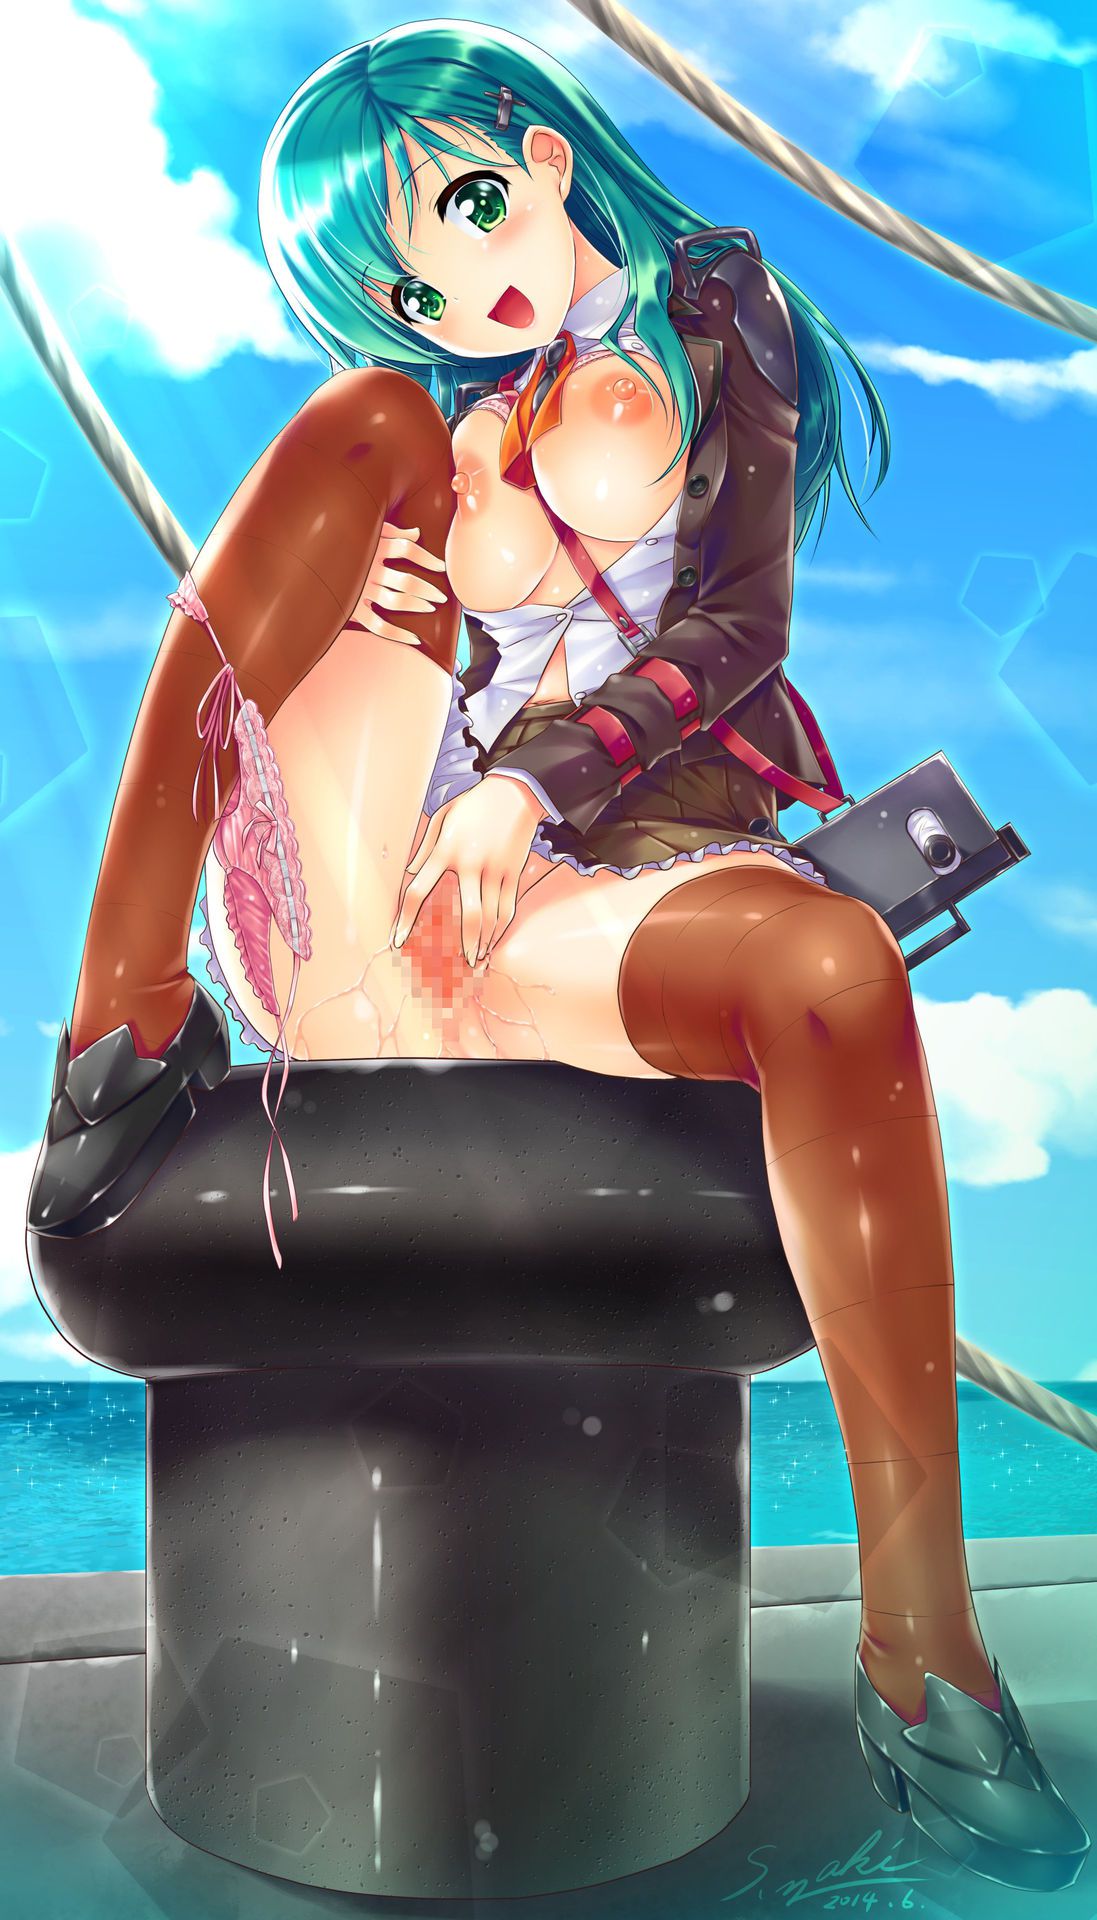 Suzuya deck stocking so much you want to watch?? Too little Admiral Kimo madoukh. I I-I I'm asokovimbin I? -----Fleet abcdcollectionsabcdviewing 2 erotic images 40